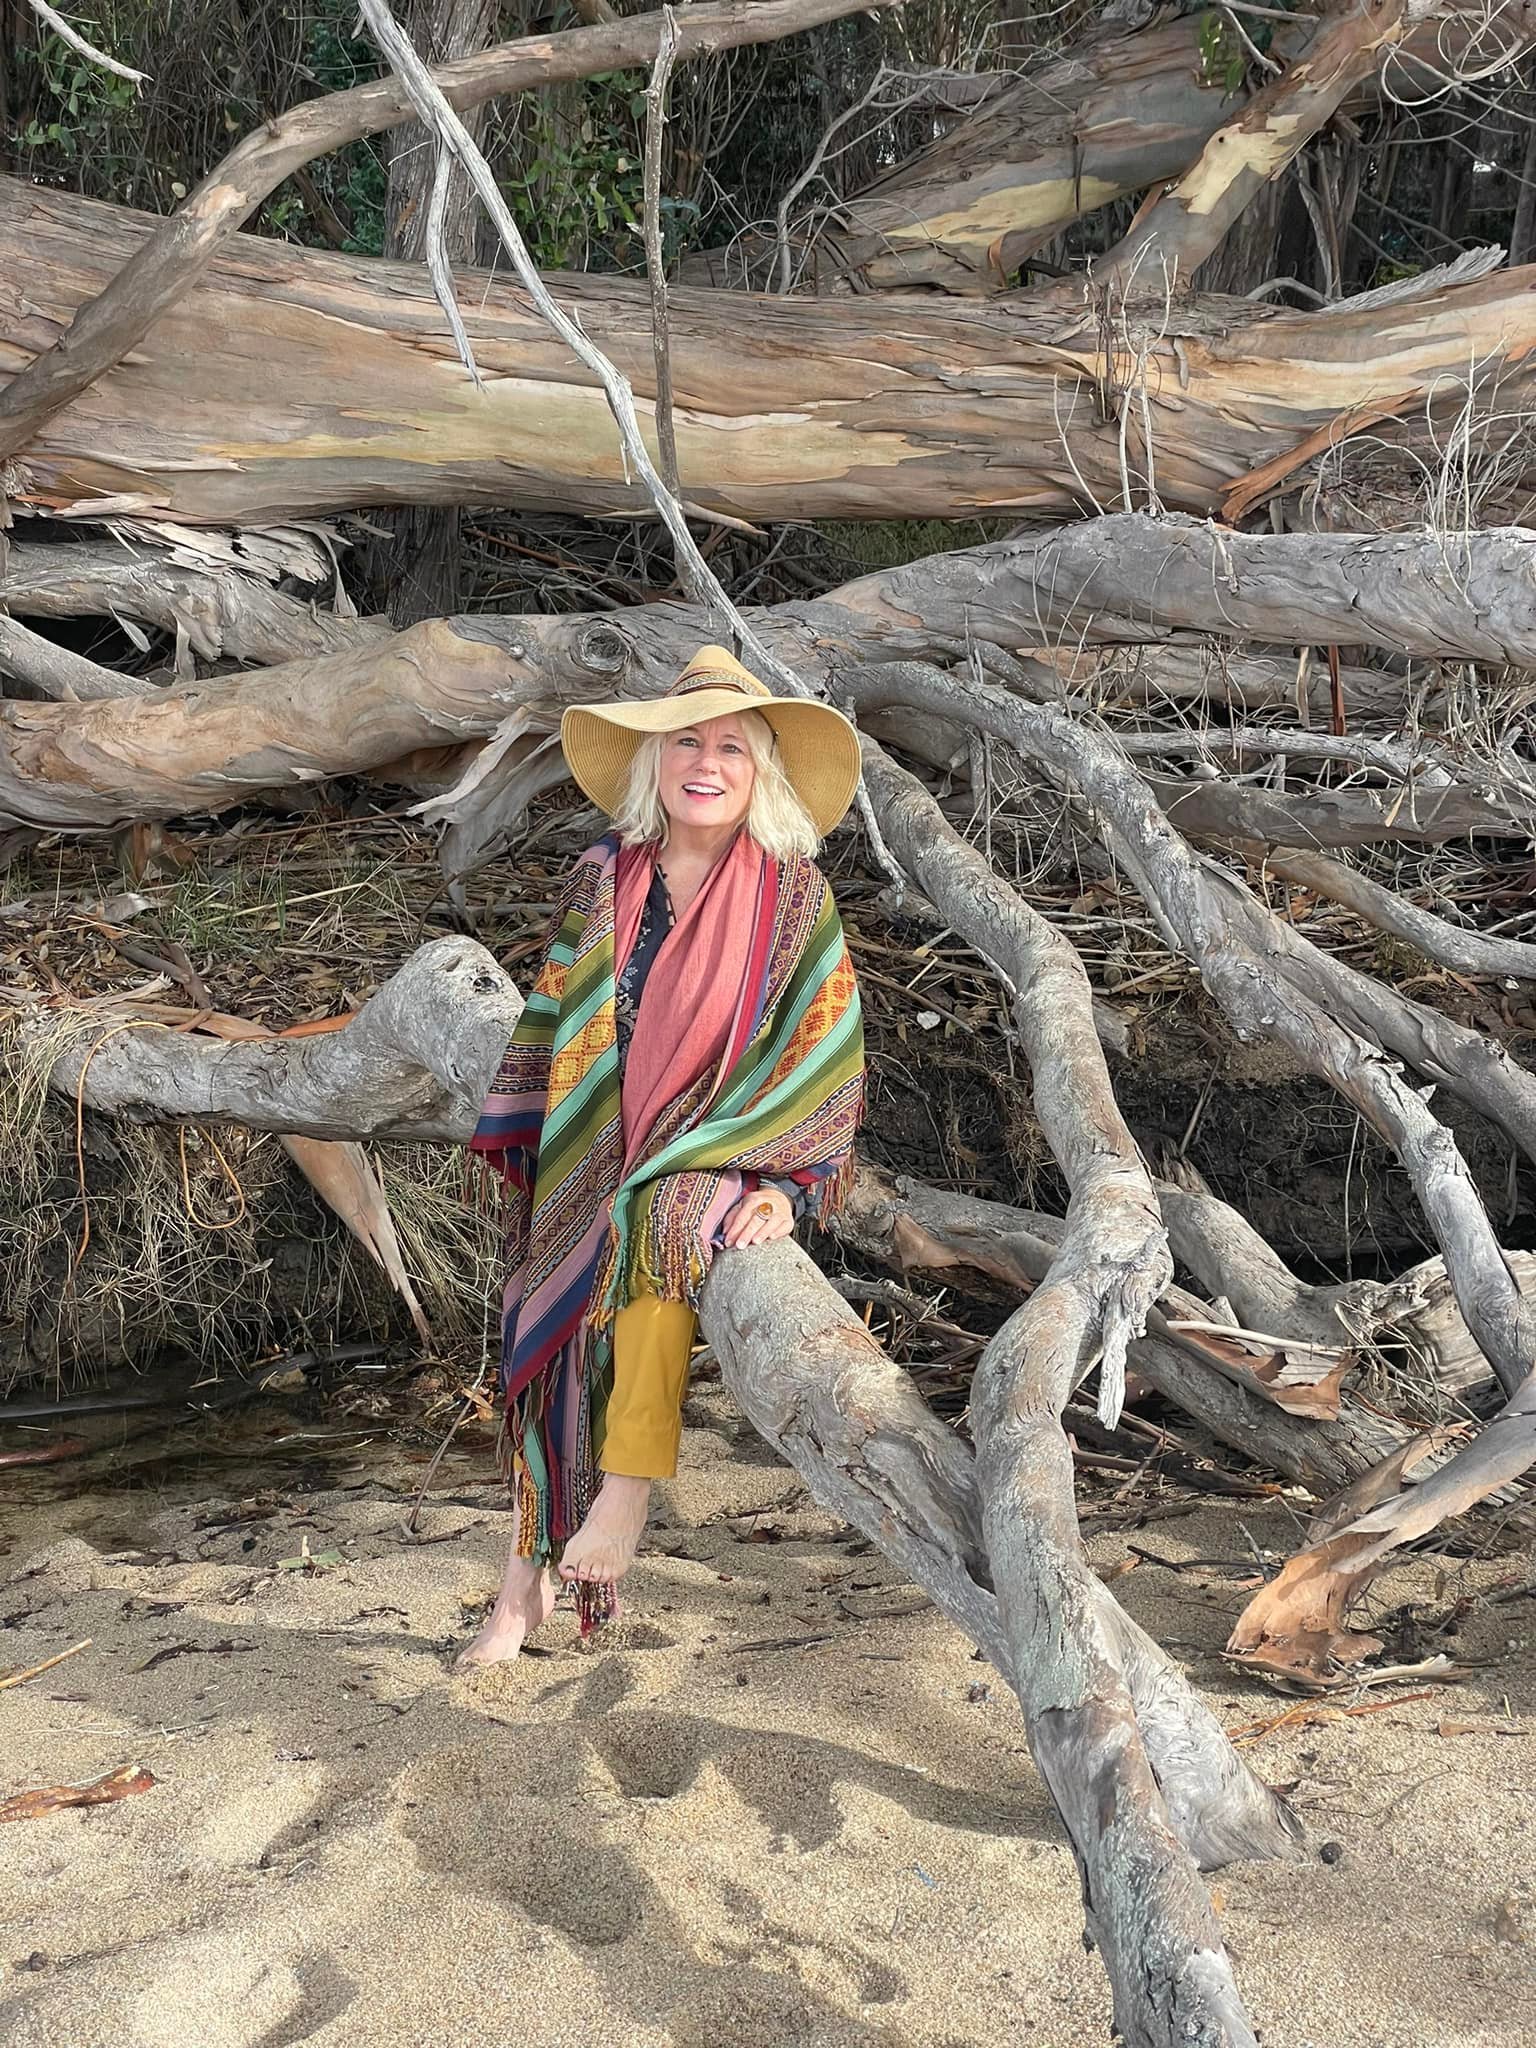 After Christmas mass and singing at the Carmelite monastery, we walk to the beach and I climbed an enormous fallen eucalyptus tree. The animist in the spirit of the mystery in all of the natural world.. loving kindness and beauty connect us with grac